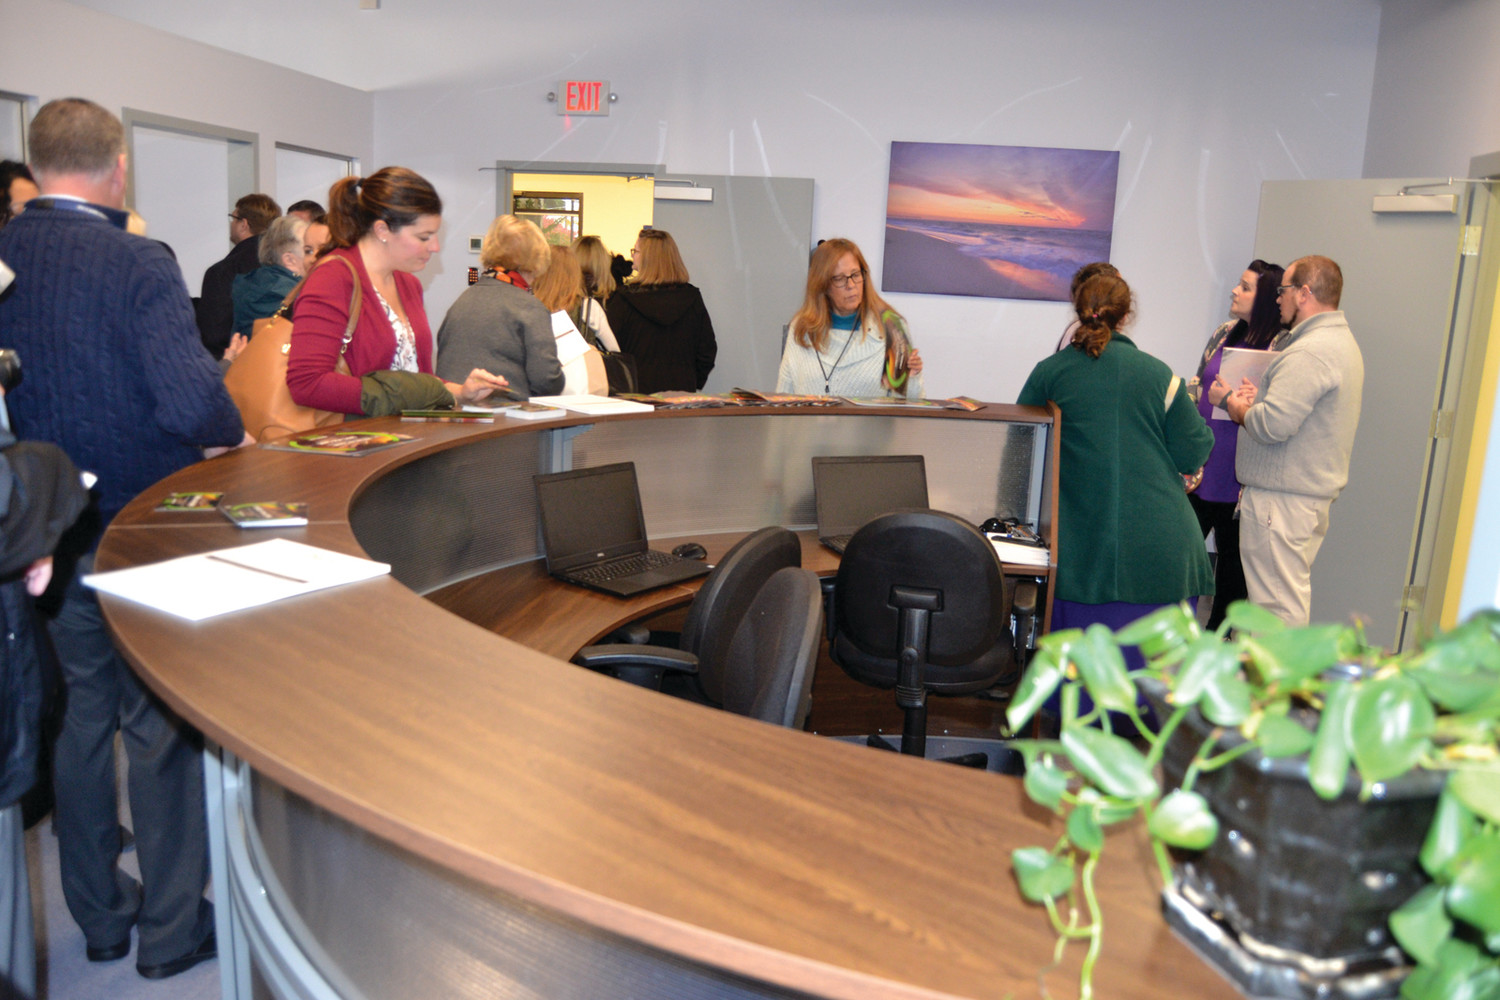 READY TO SERVE: Though sparsely furnished, the facility’s goal is to provide a safe, relaxing and welcoming environment for clients. Those who visit the triage facility can stay for up to 24 hours while their situation is being addressed.